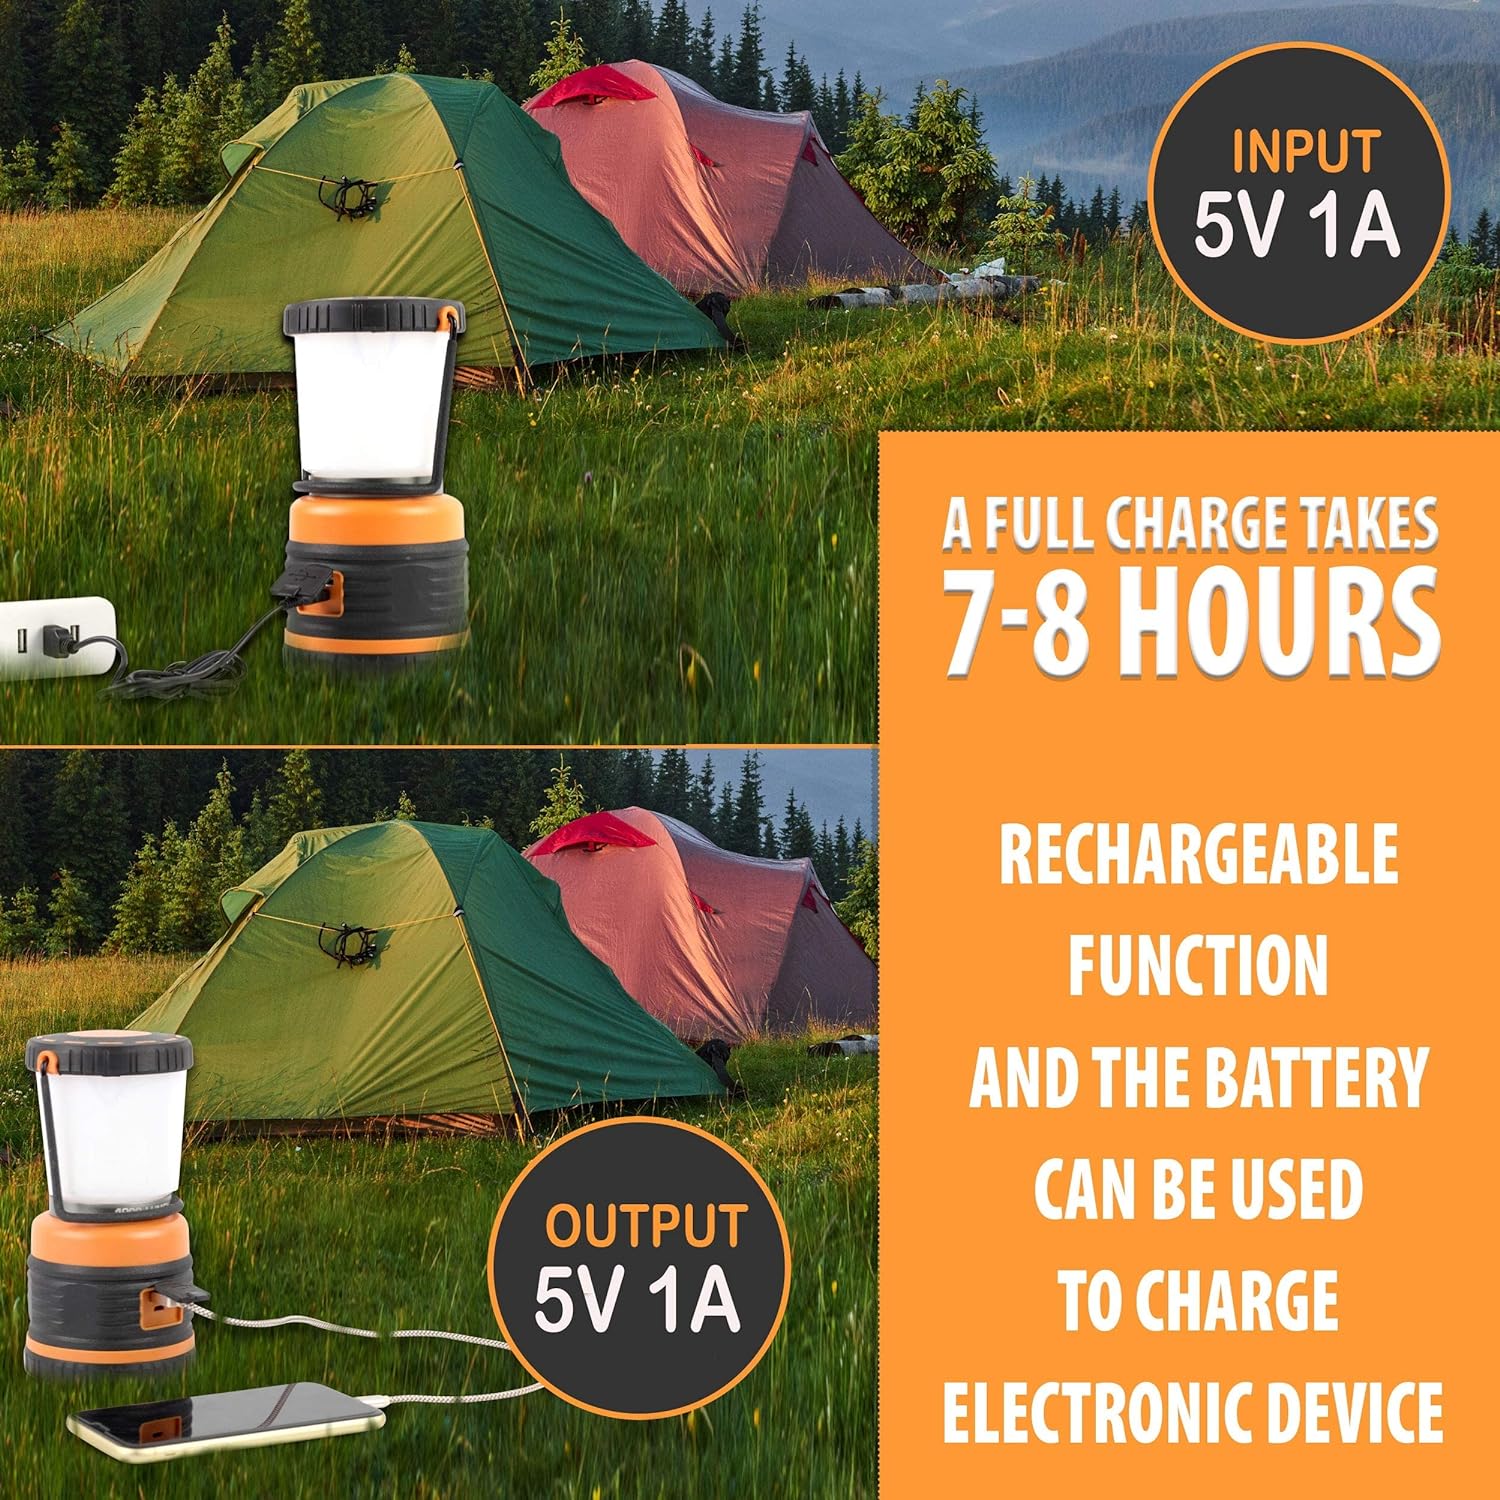 LED Camping Lantern Rechargeable, 1800LM, 4 Light Modes, 4400mAh Power Bank, IP44 Waterproof, Perfect Lantern Flashlight for Hurricane, Emergency, Power Outages, Home and More, with USB Cable (2 Pack)